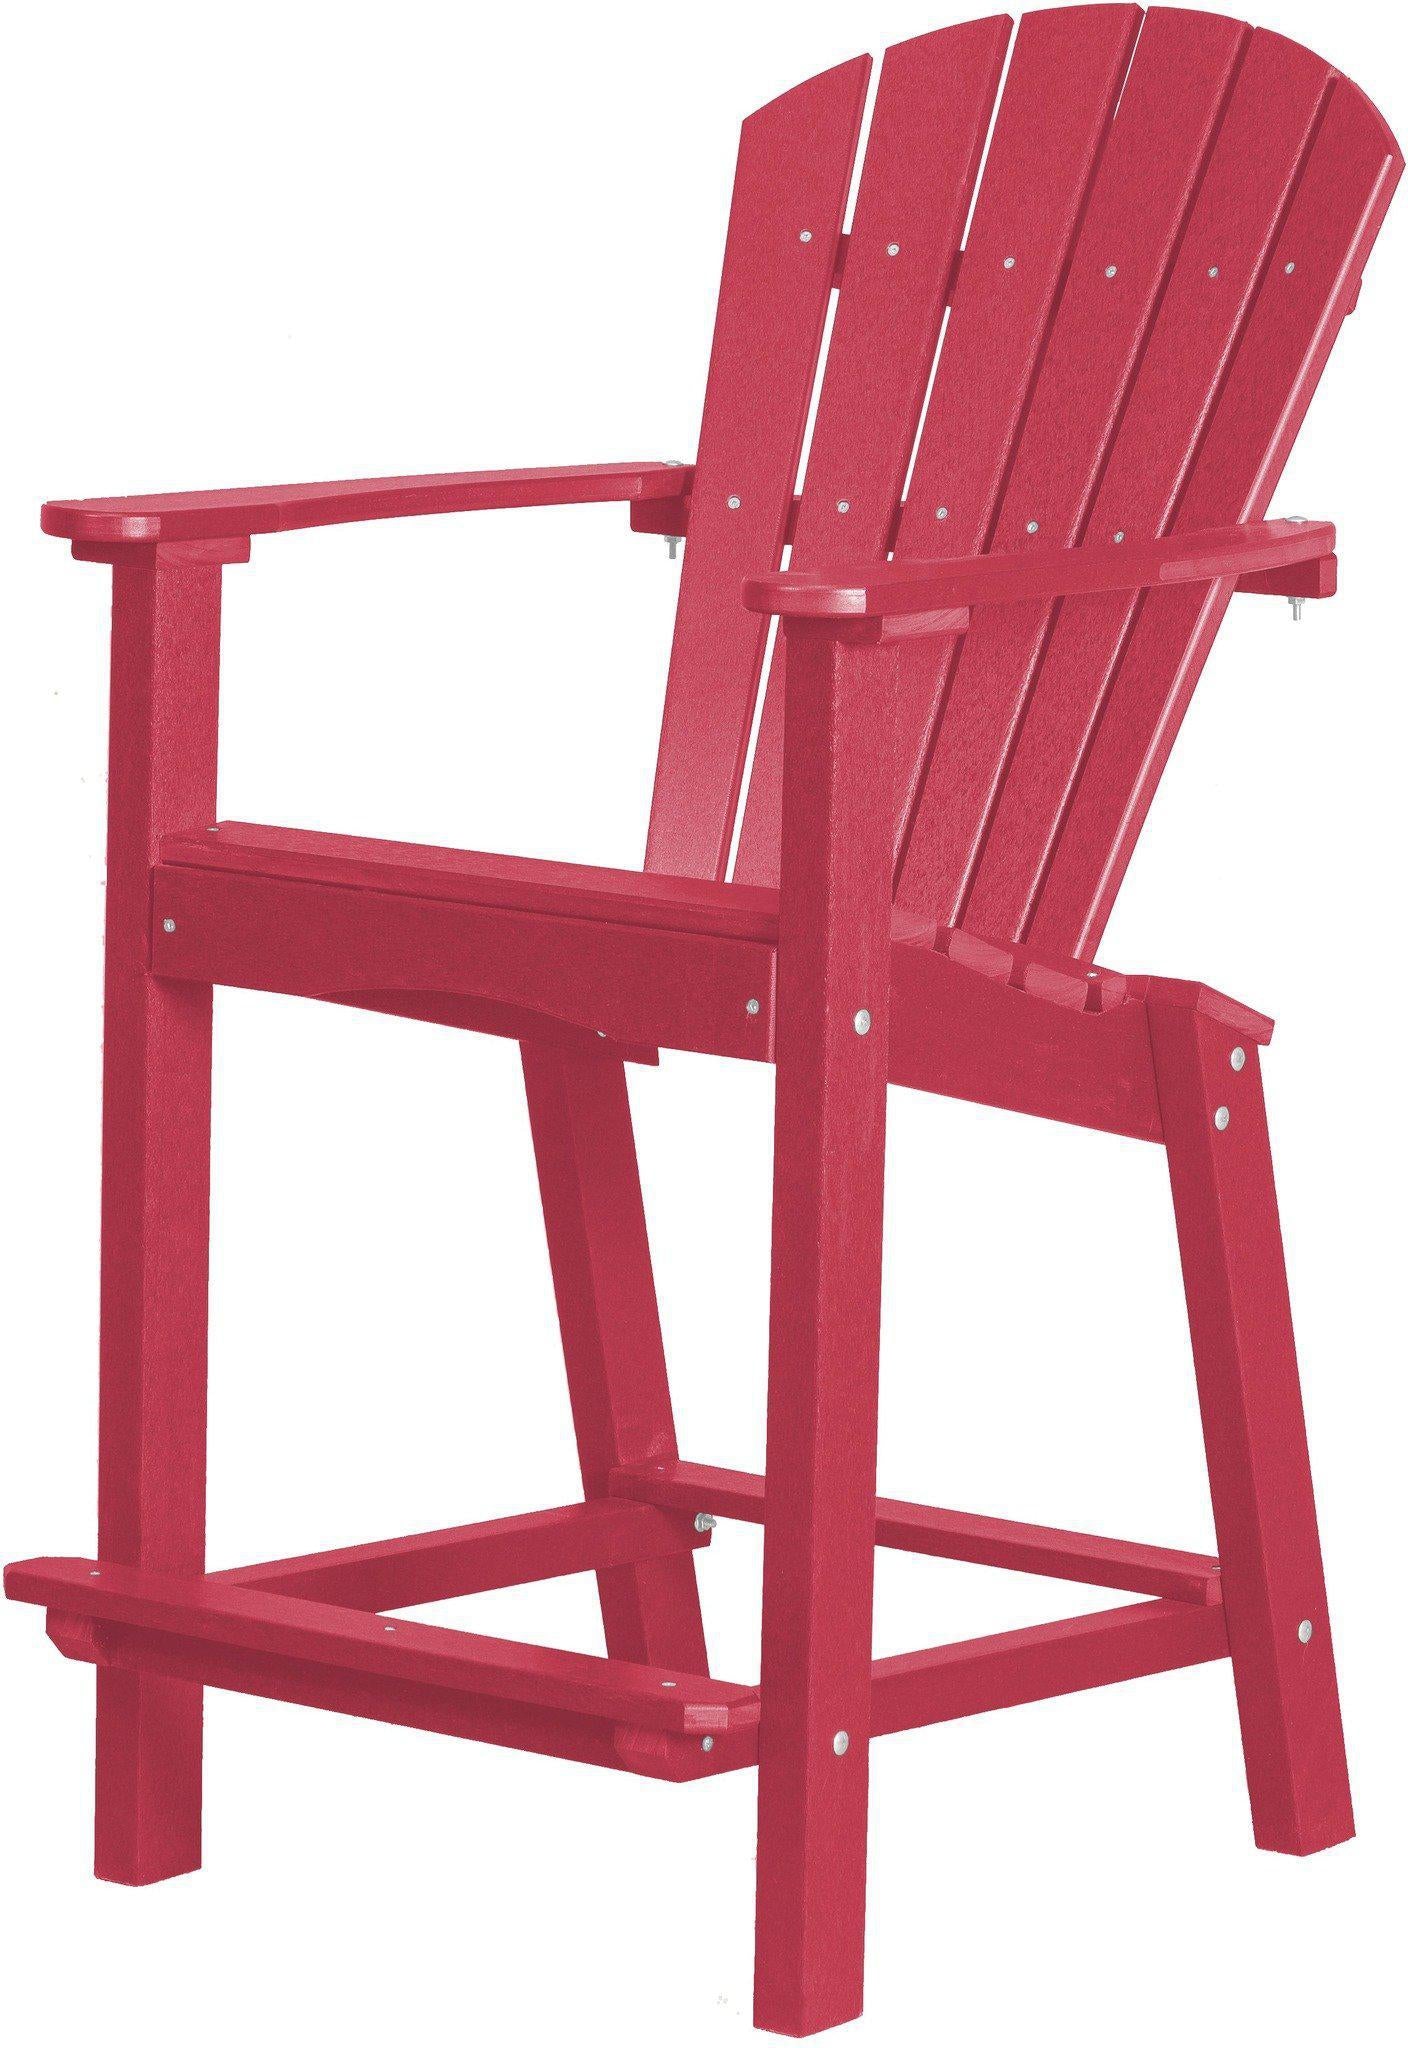 Wildridge Recycled Plastic Outdoor Classic 30” High Dining Chair - LEAD TIME TO SHIP 4 WEEKS